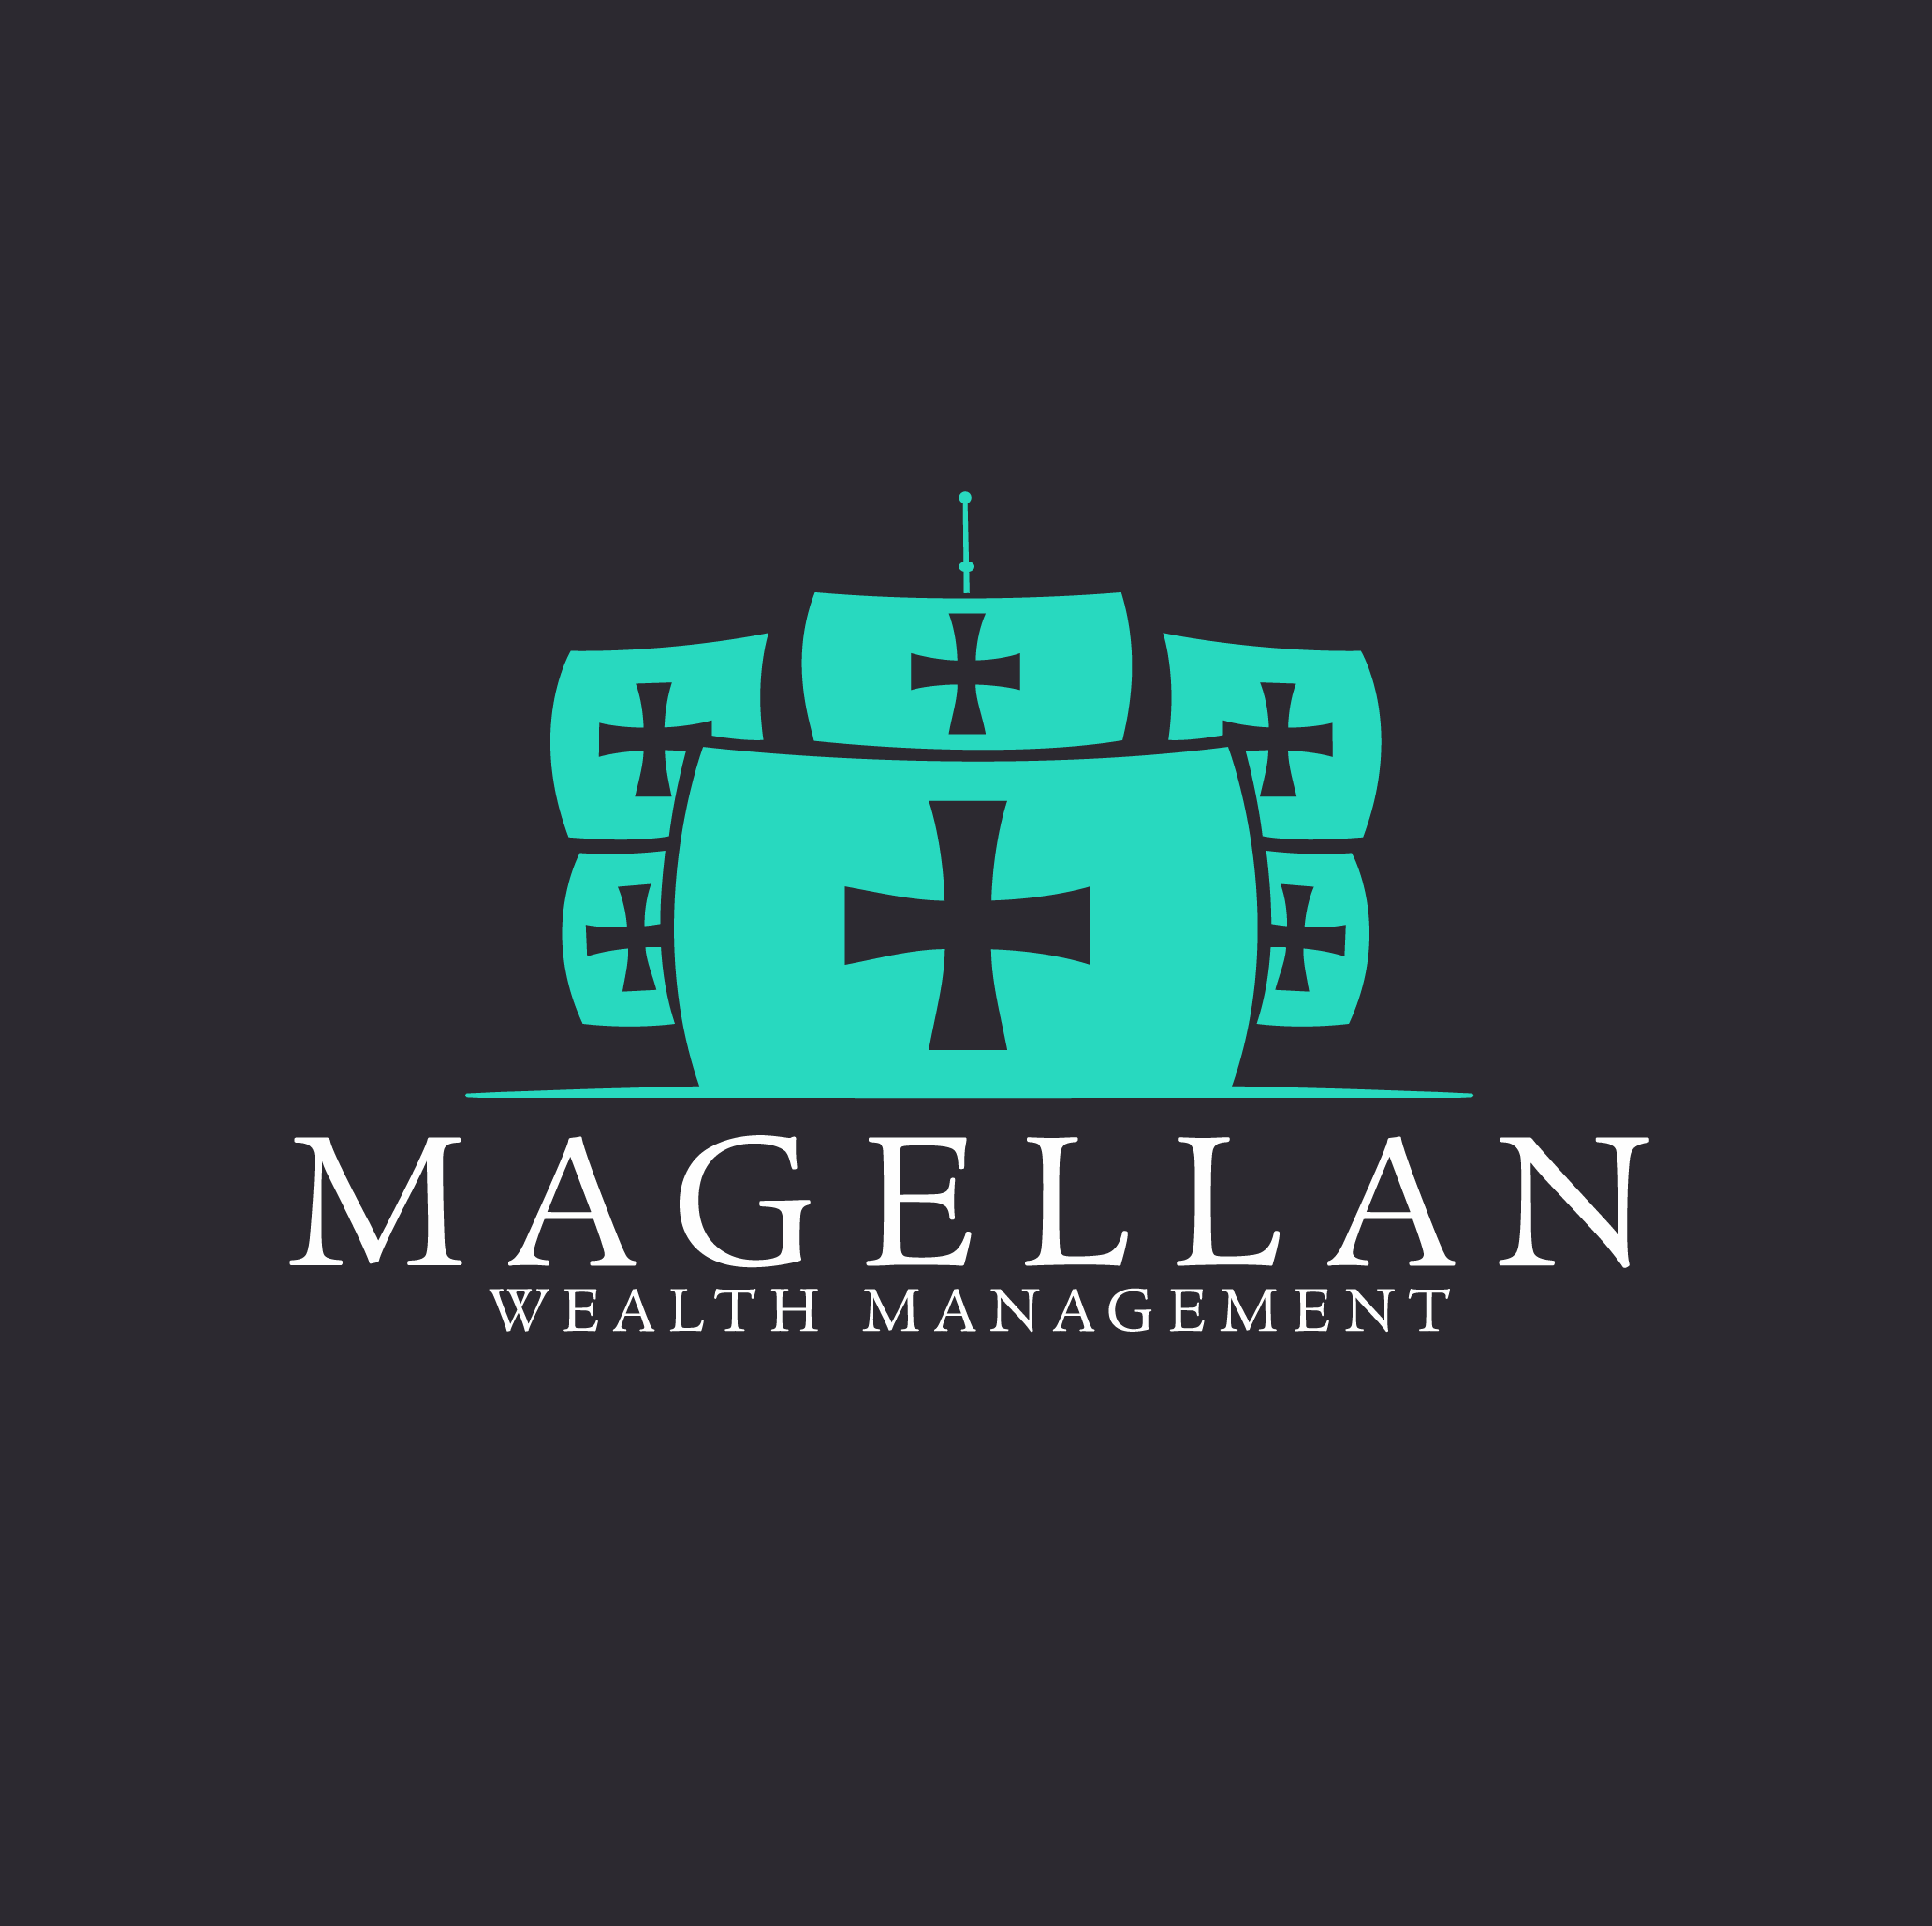 Magellan Wealth Management Inc. Guides Property Investors to Get the Right Type of Property Investment